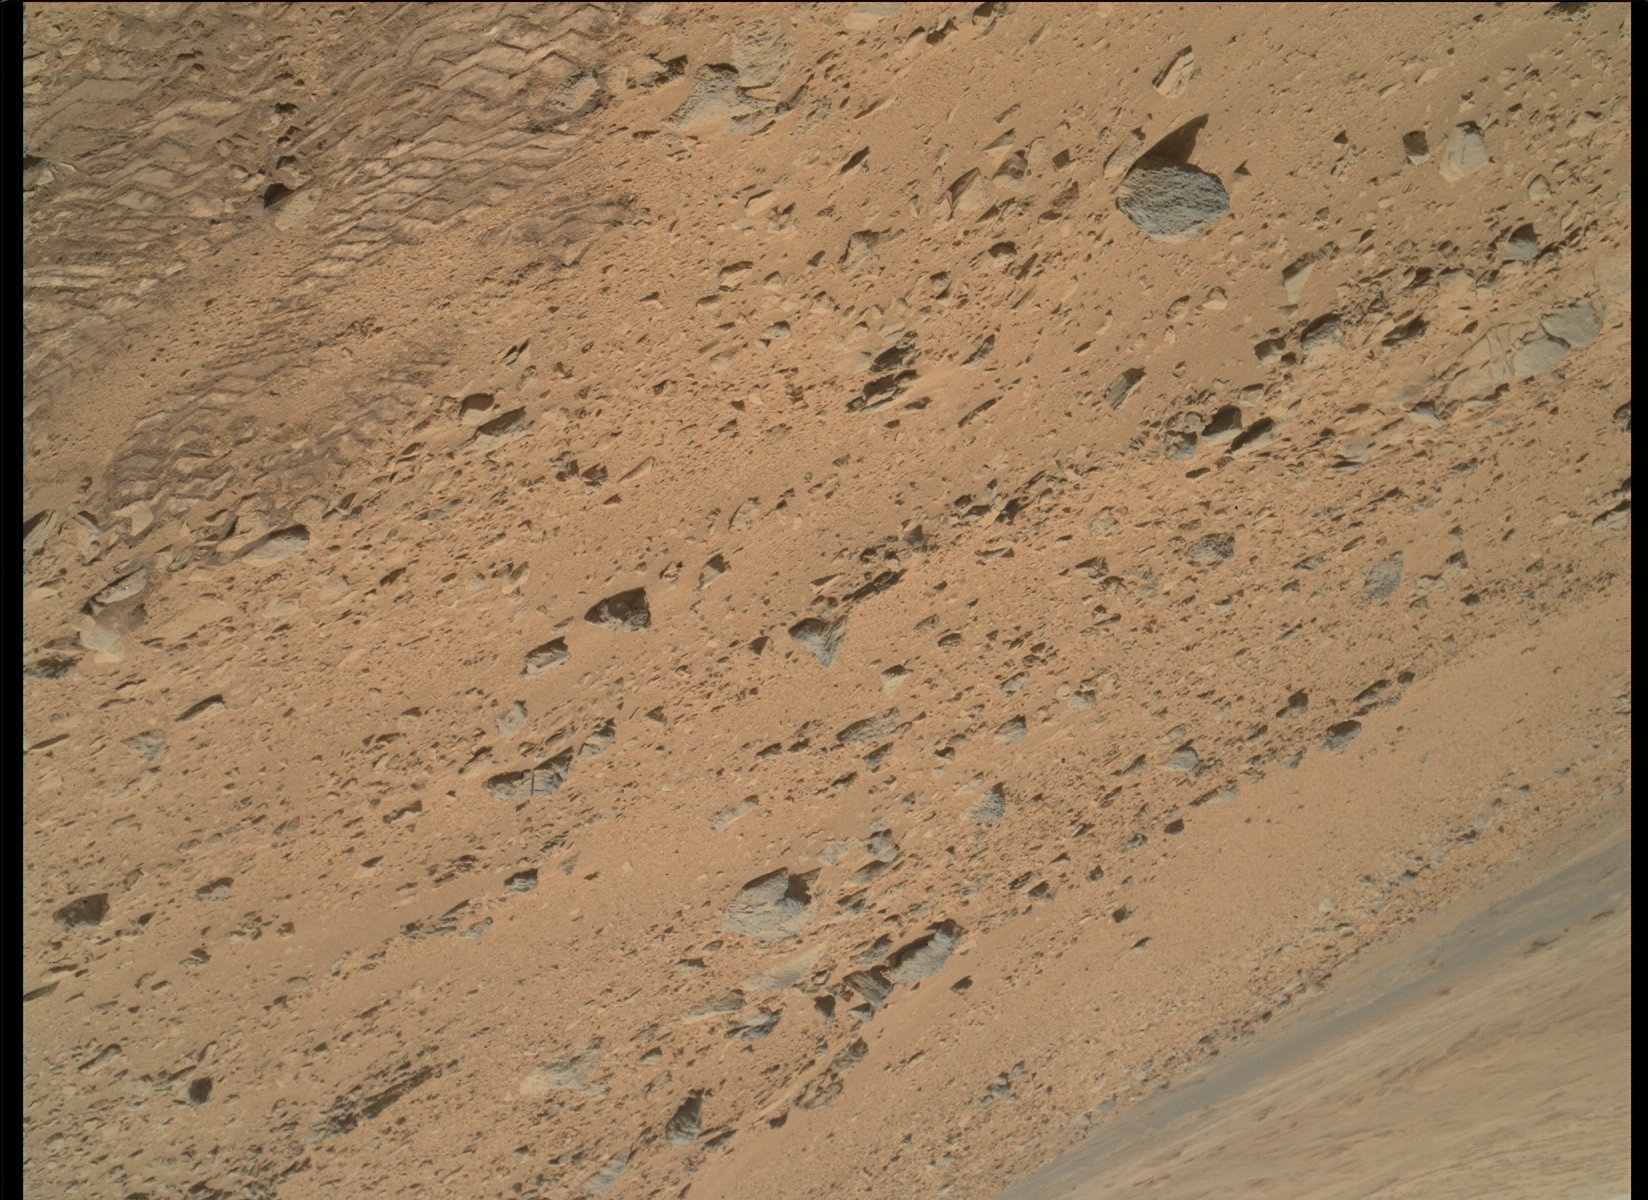 Nasa's Mars rover Curiosity acquired this image using its Mars Hand Lens Imager (MAHLI) on Sol 85